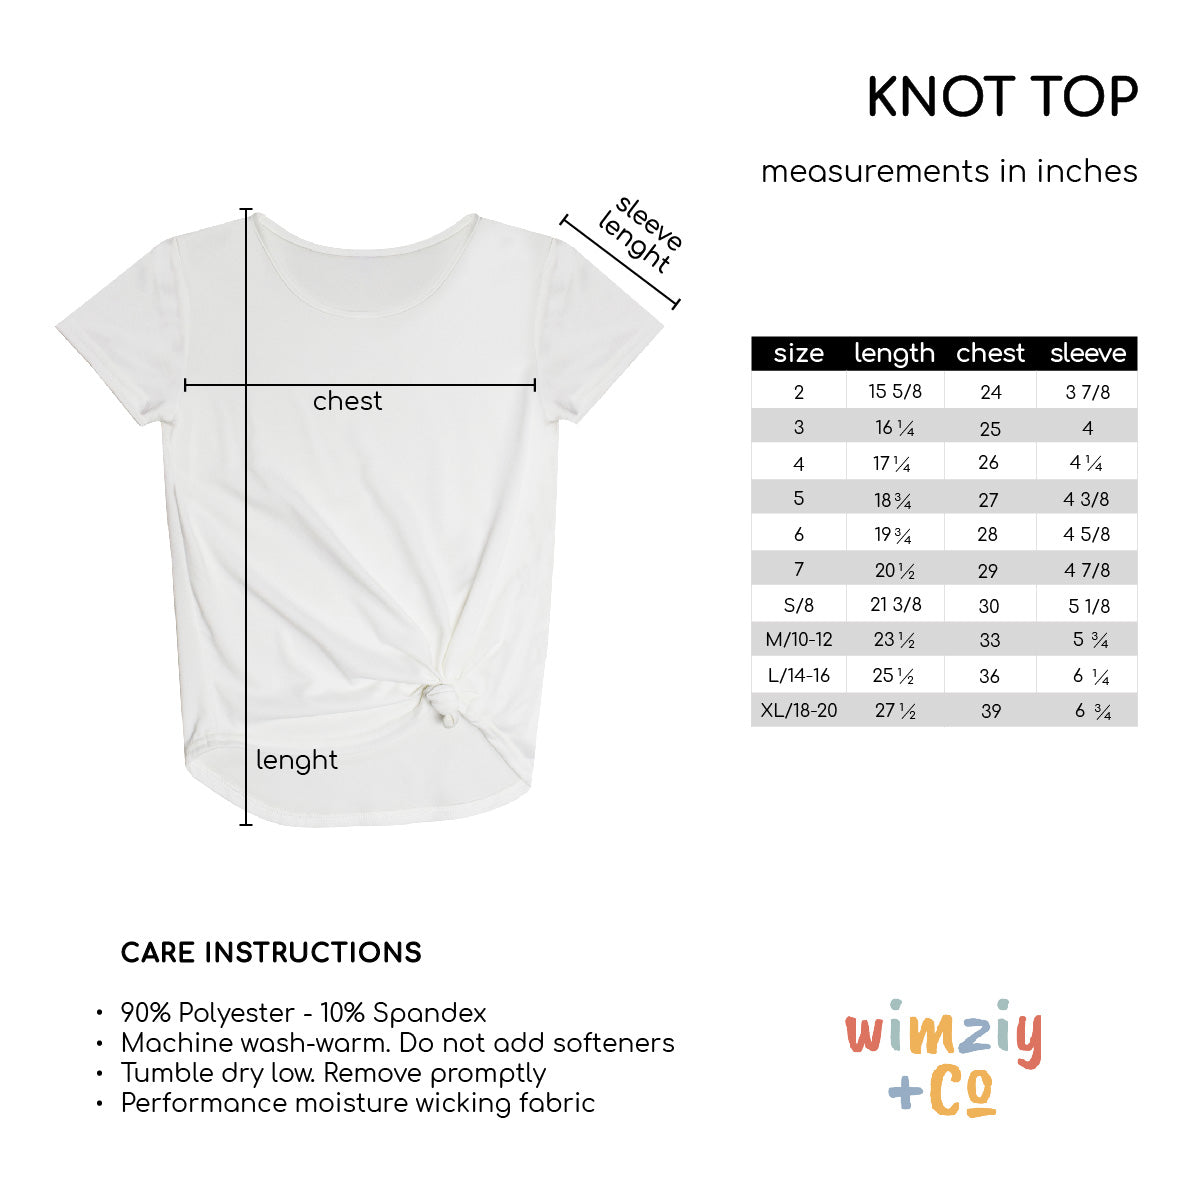 Ballet Slippers Name Knot Top - Wimziy&Co.